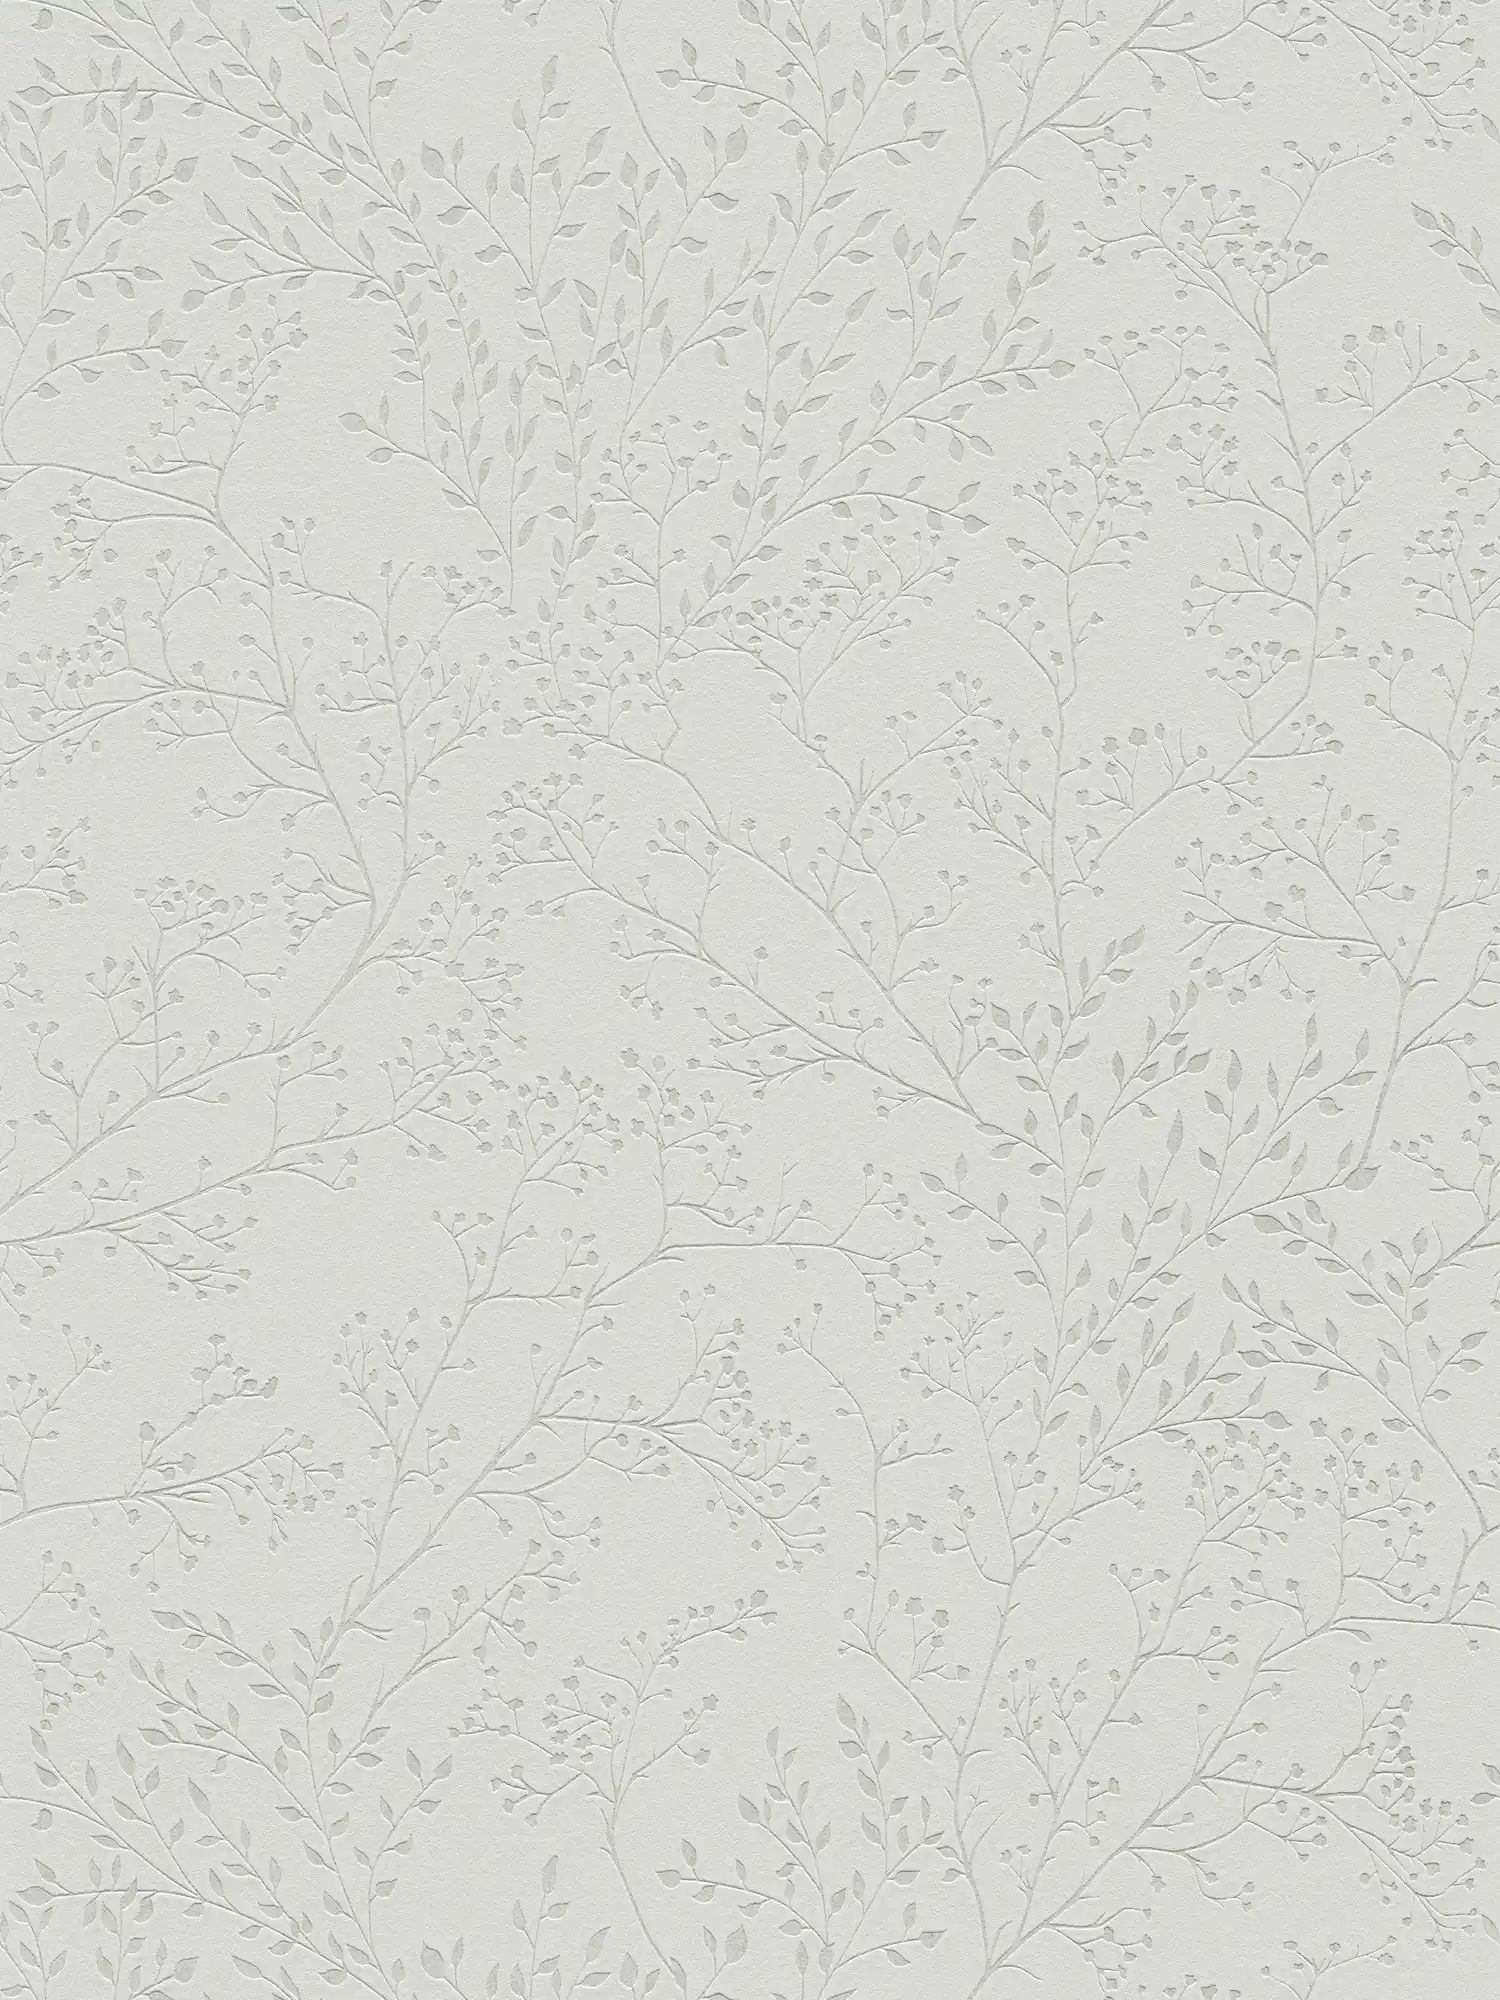 Plain wallpaper grey with leaves pattern, gloss & texture effect
